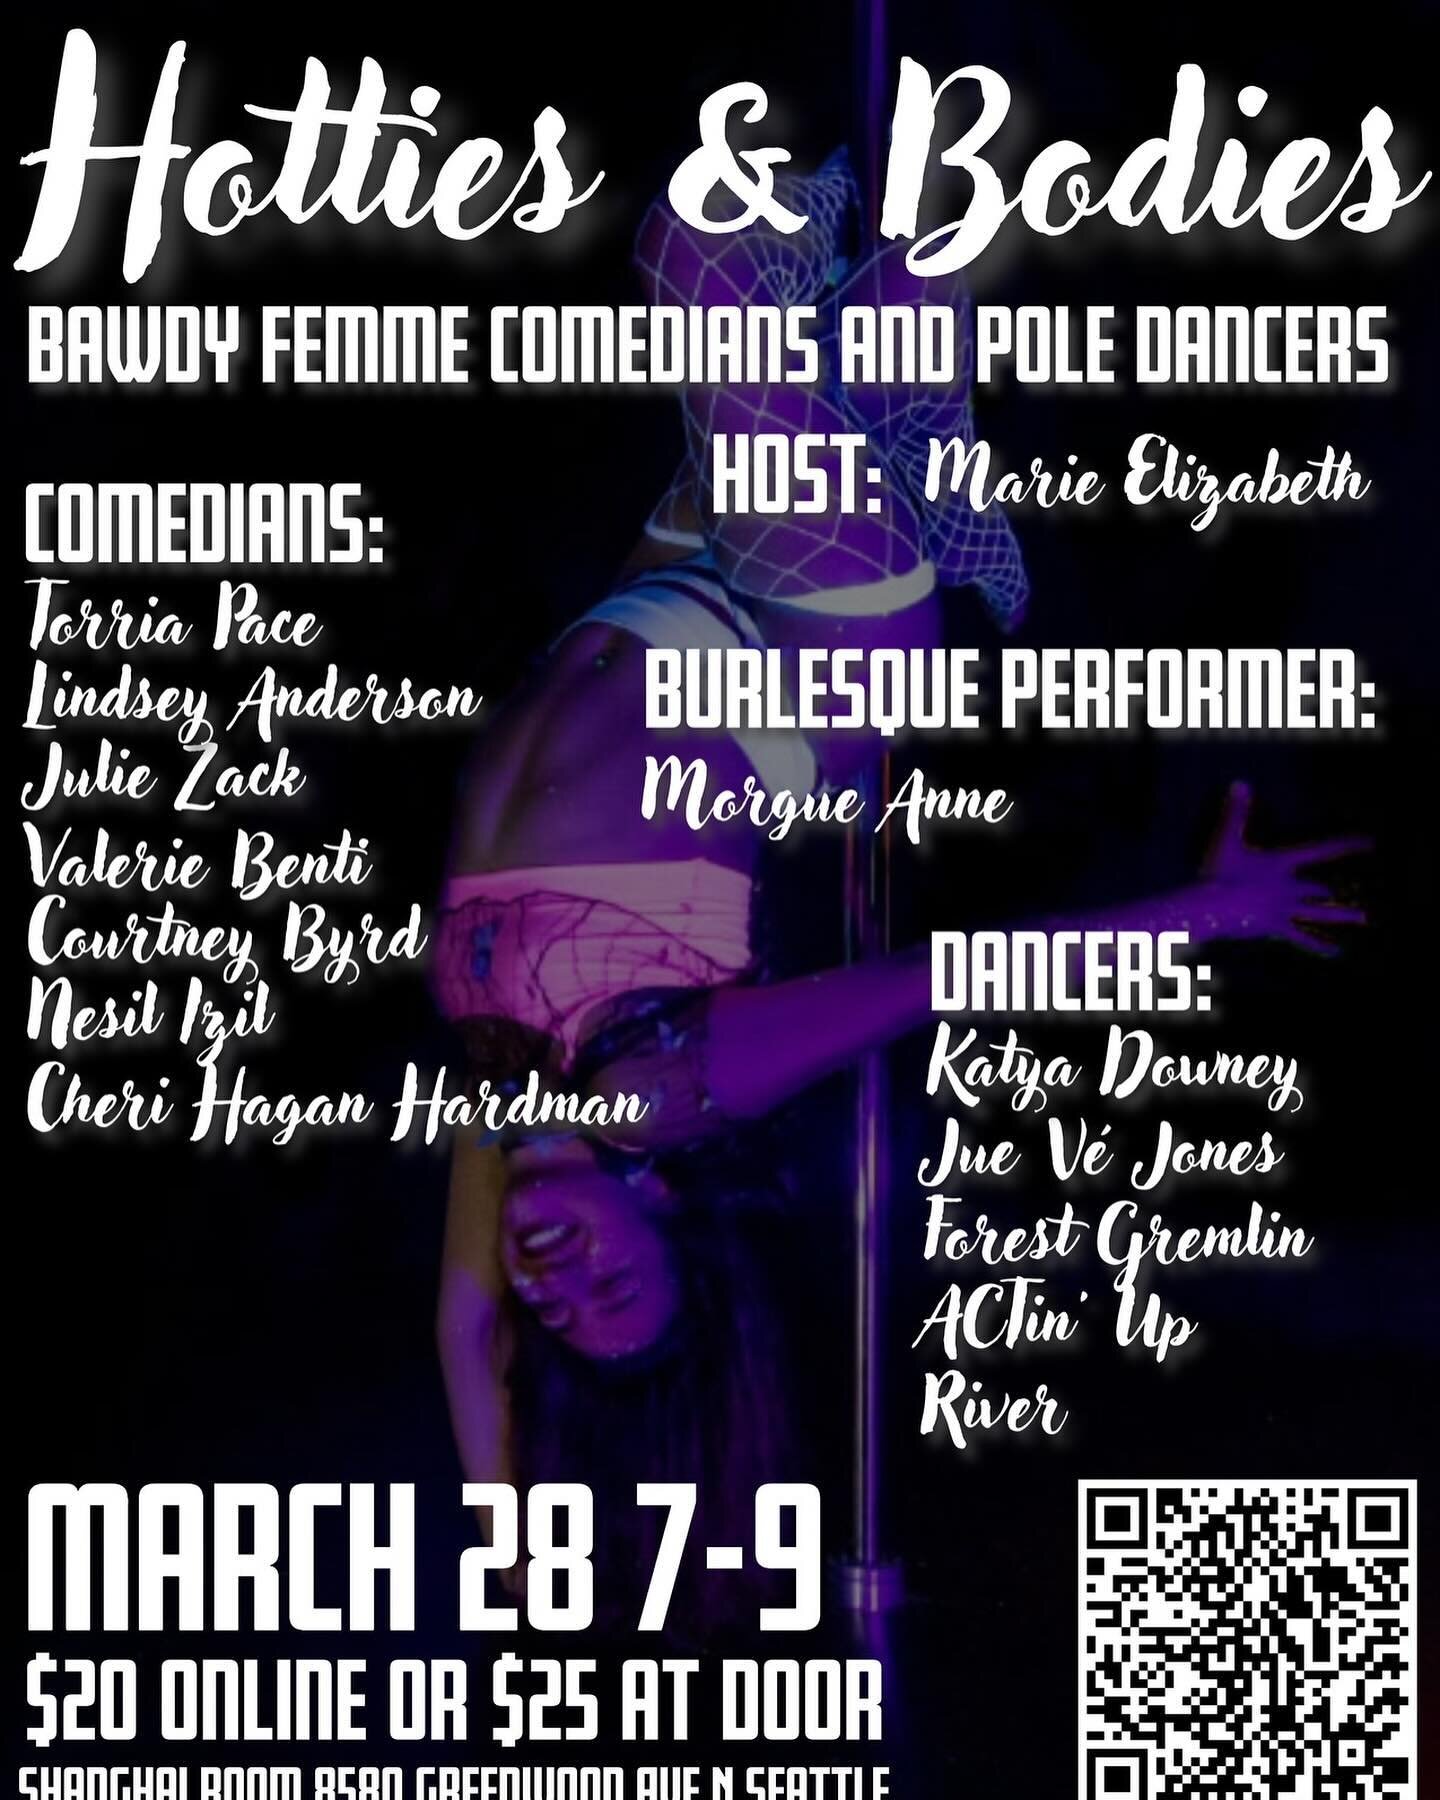 Thursday, 3/28. Hotties &amp; Bodies- a night of pole dancing and comedy! 21+ / doors at 6:30 / $20 adv / $25 at door #seattlecomedy #seattlepoledancing #shanghairoomcomedy #shanghairoomshows